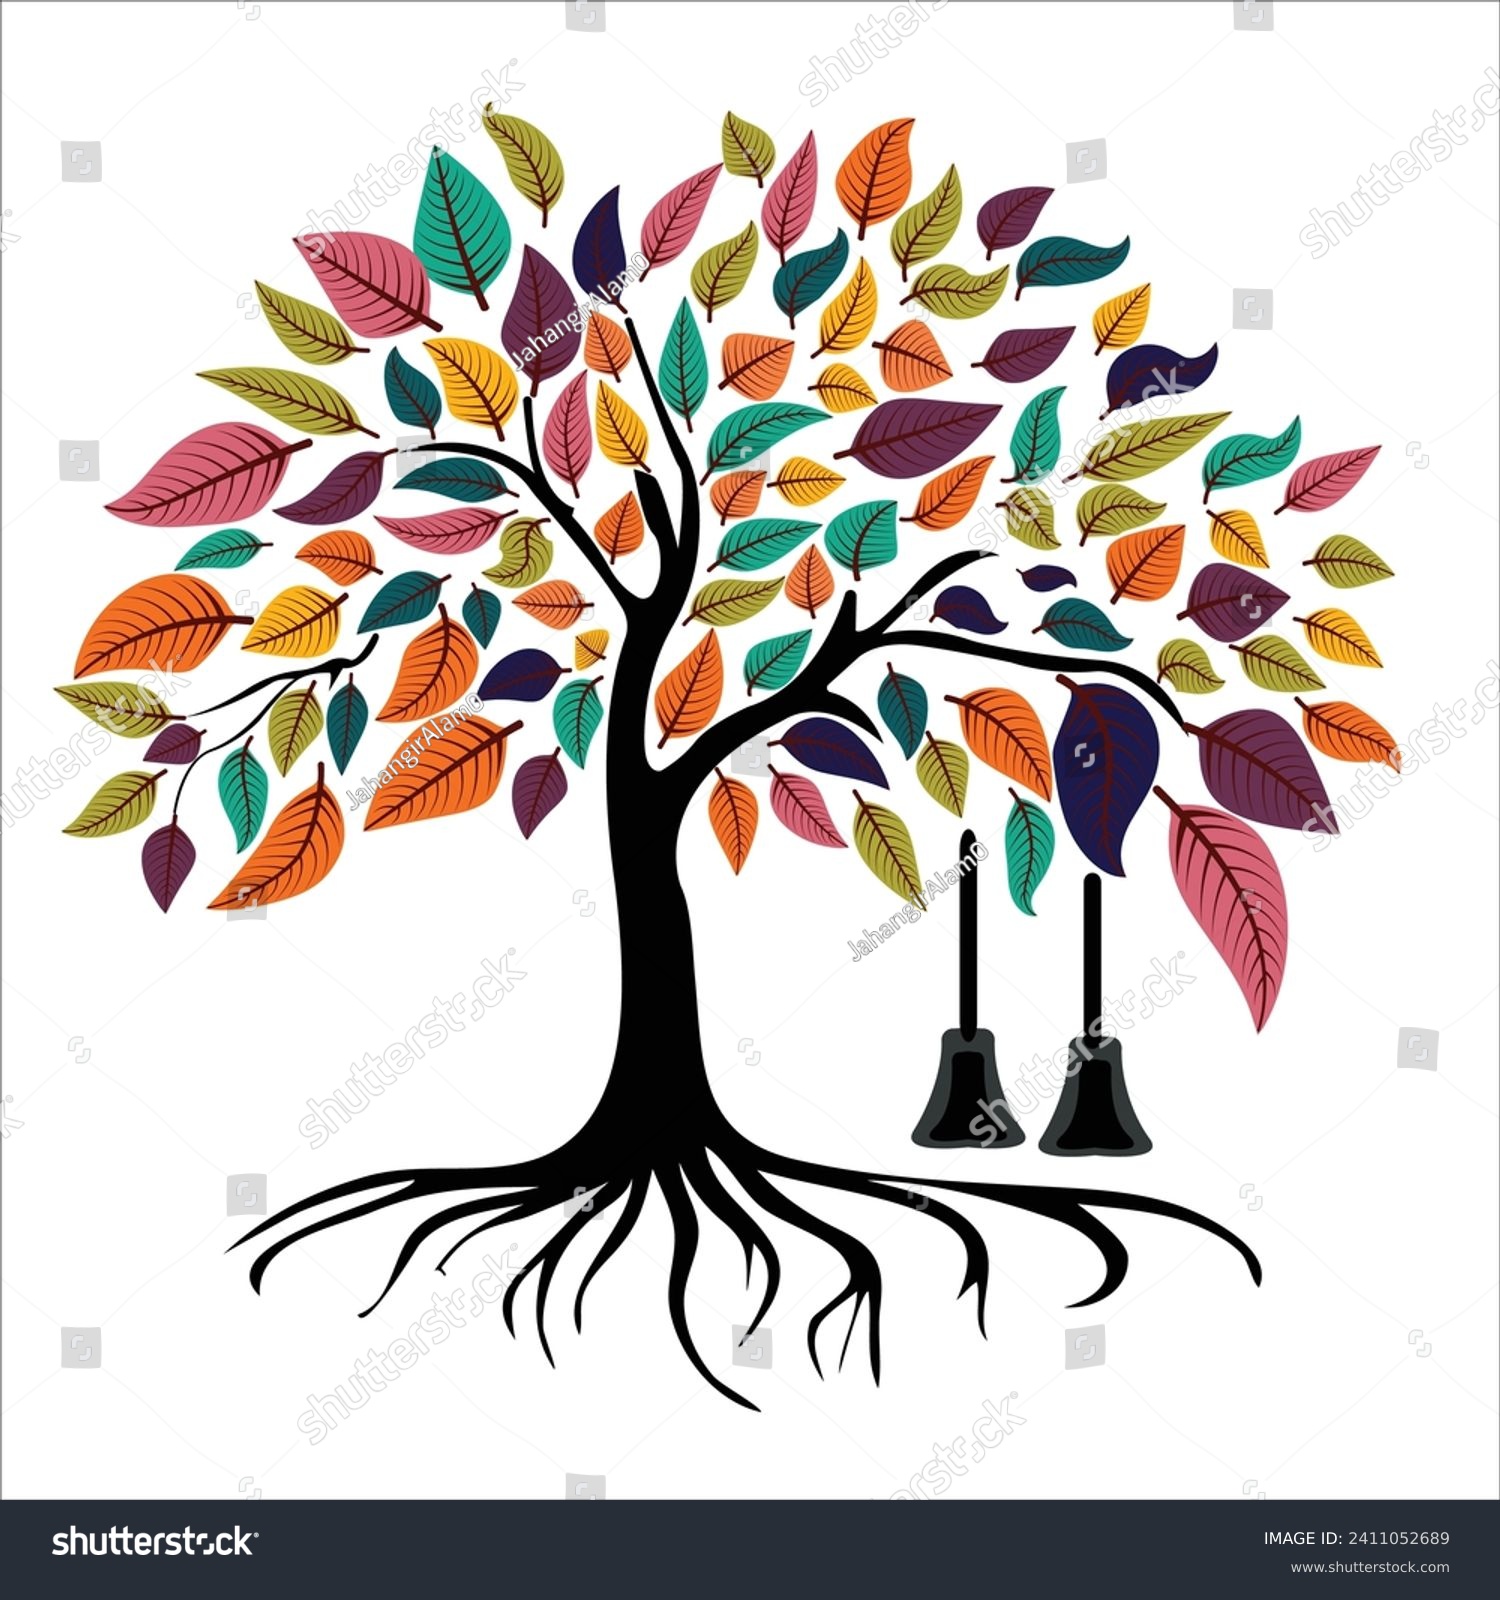 SVG of tree with roots and colorful leaves hanging branches white background svg